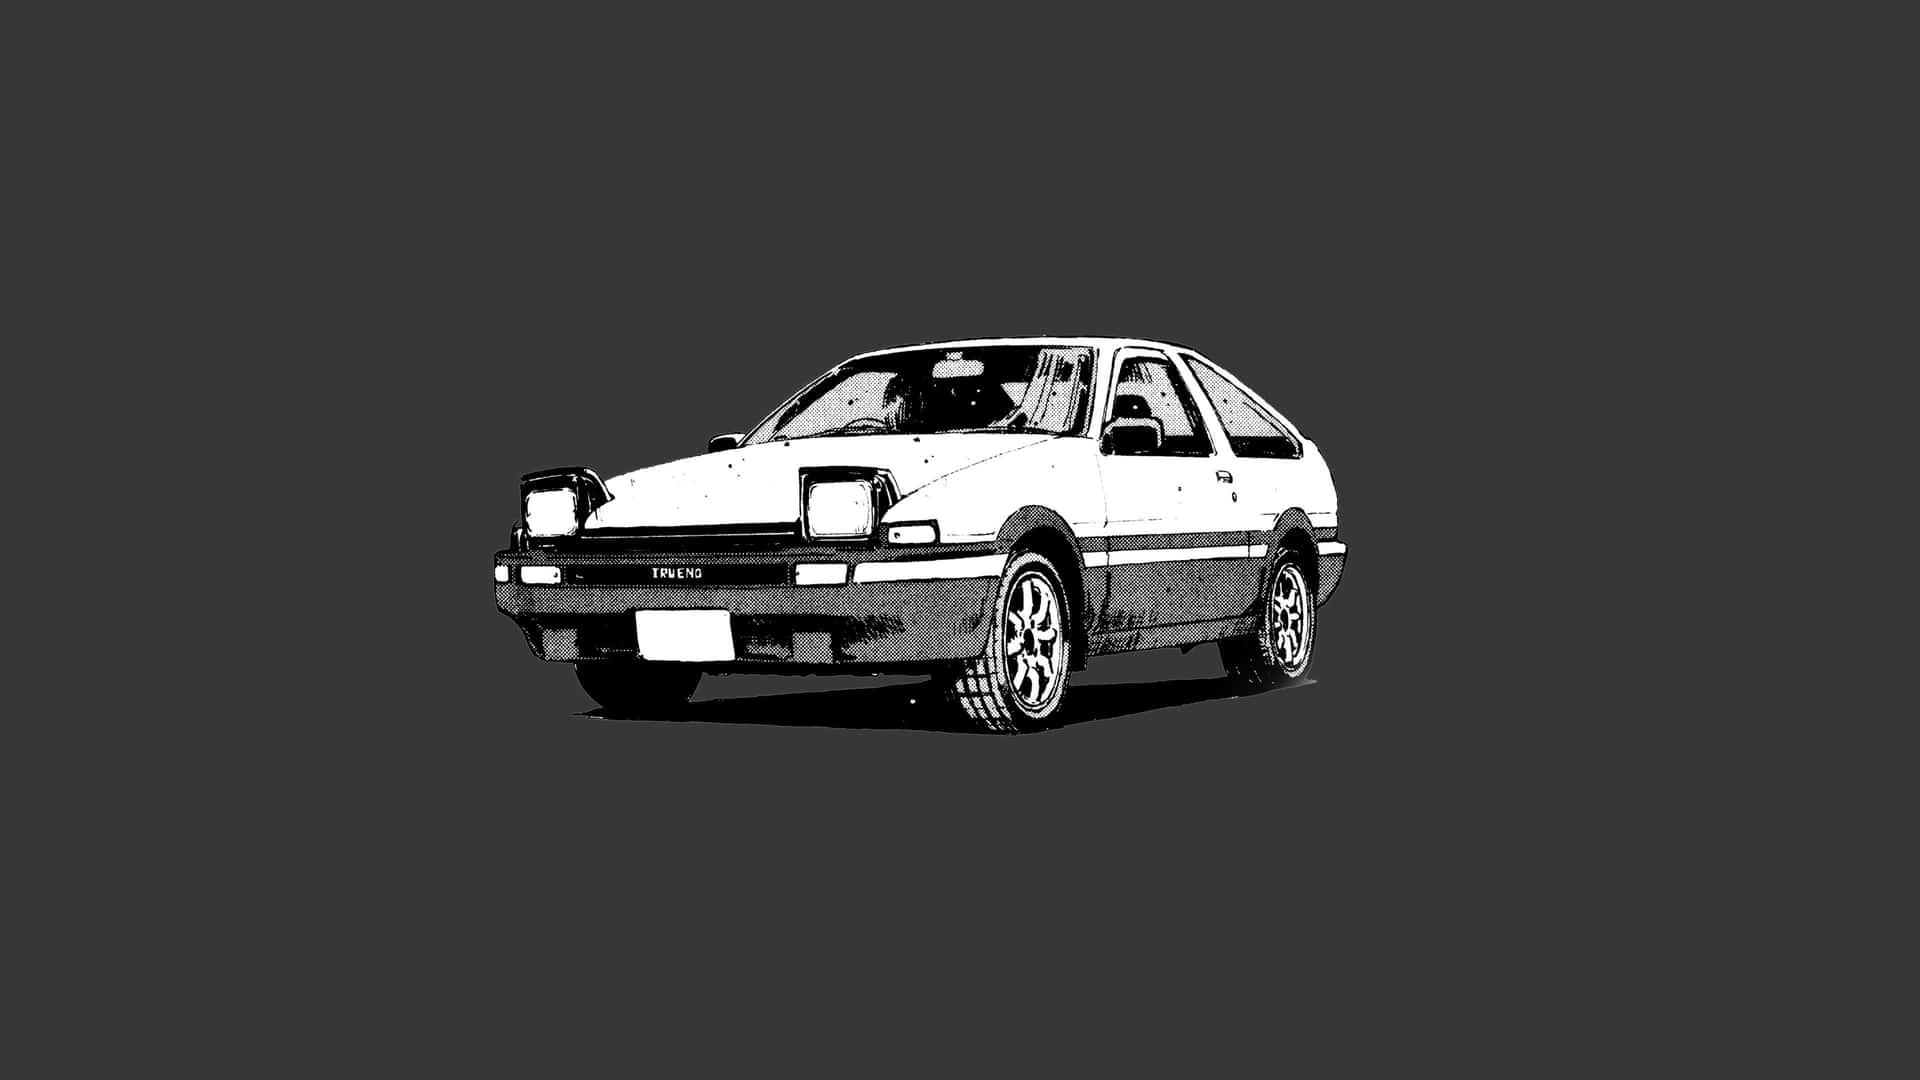 Free Ae86 Wallpaper Downloads, Ae86 Wallpaper for FREE